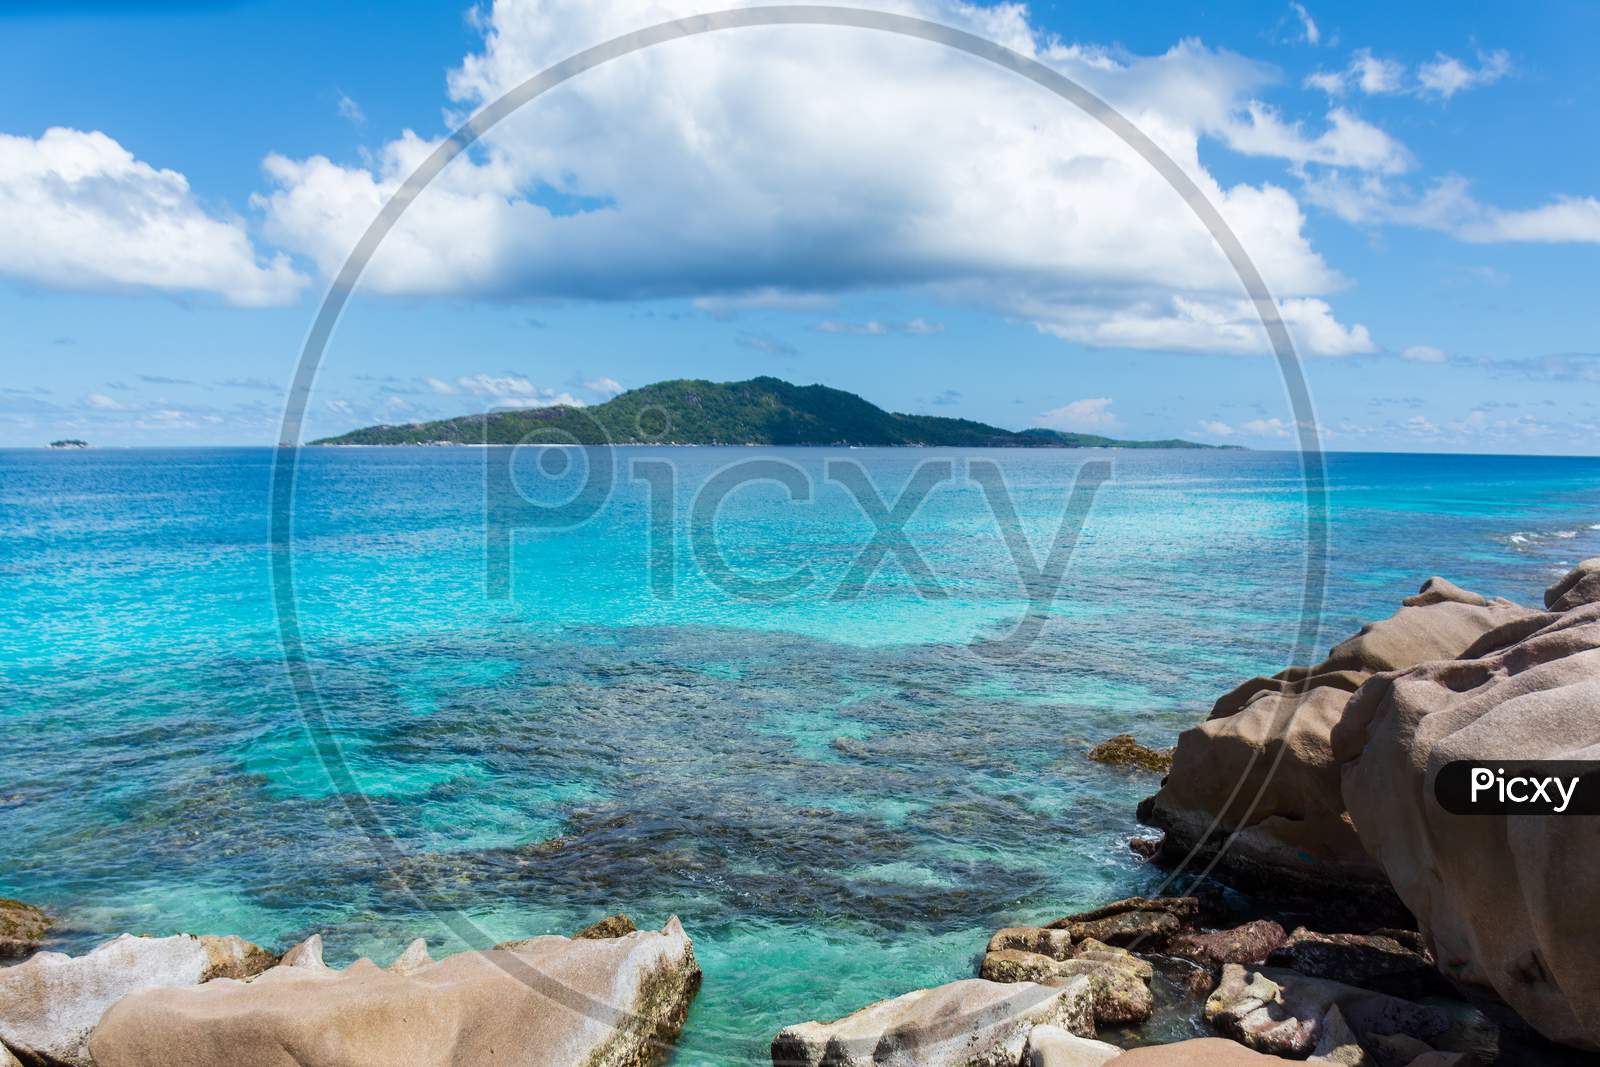 Turquoise Blue Waters Of La Digue